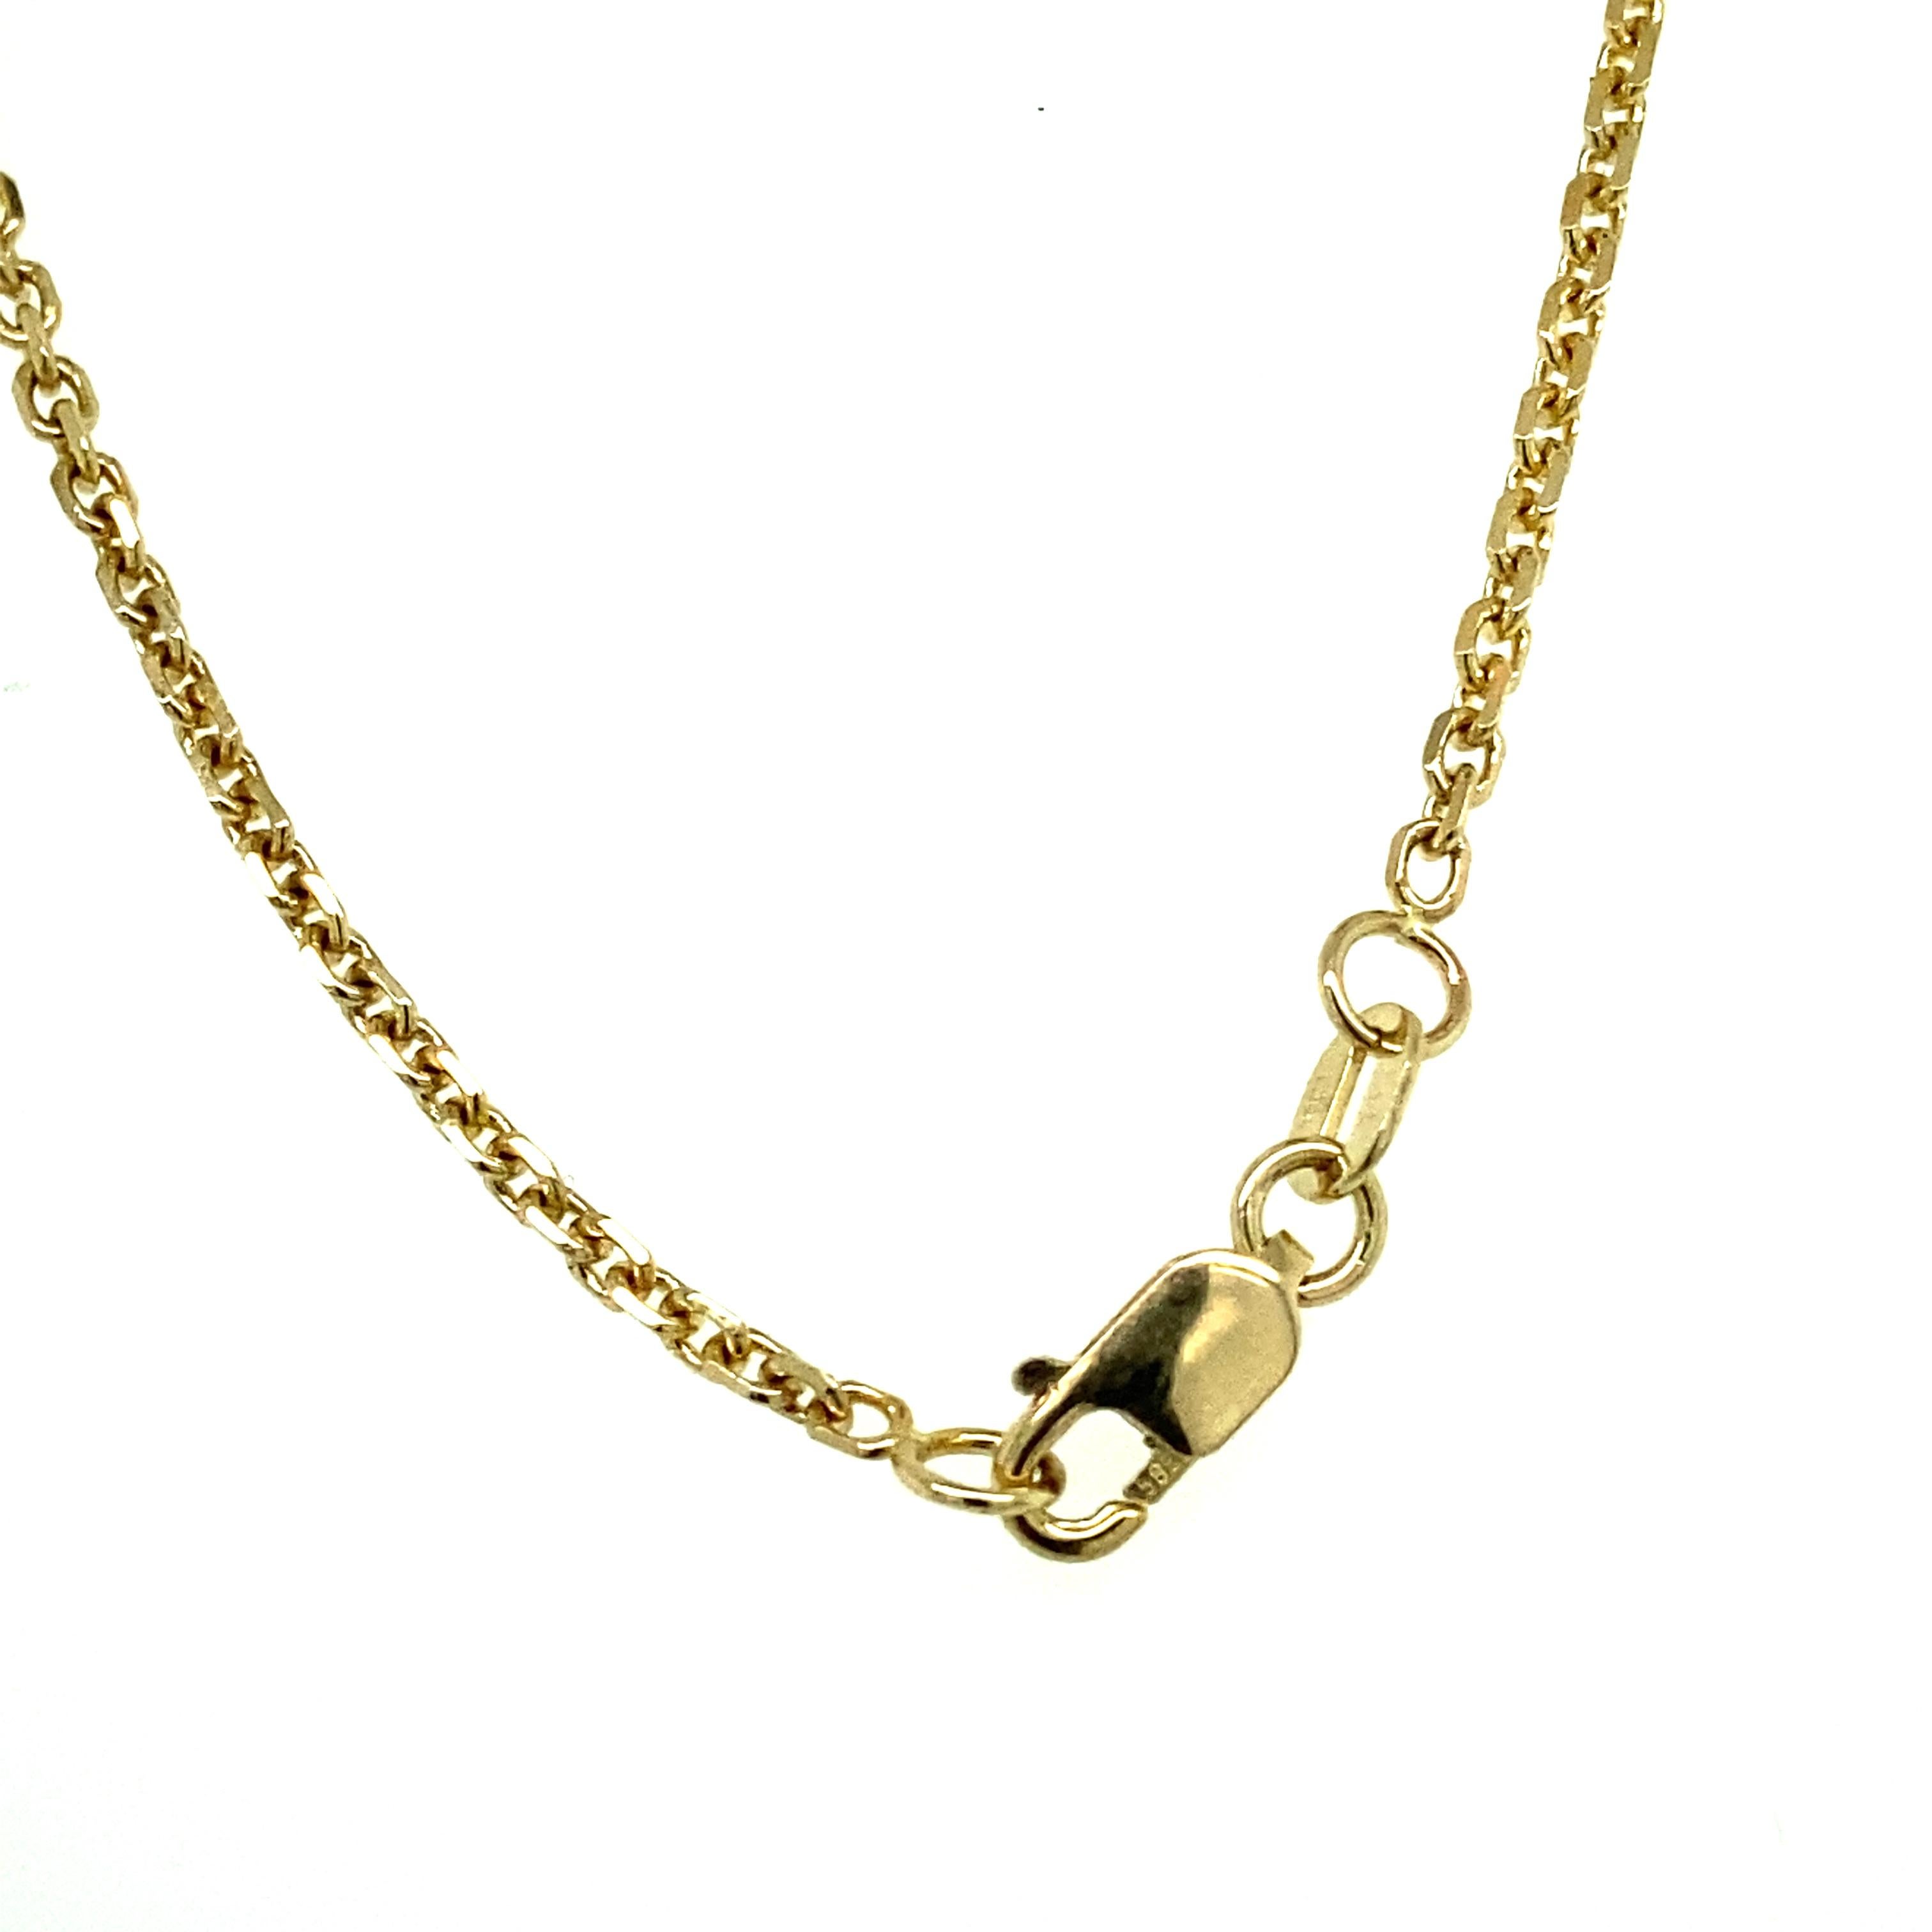 One 14 karat yellow gold (stamped RCI 14K) cable link chain.  The chain weighs 4.26 grams and measures 18 inches long and is complete with a lobster clasp.  